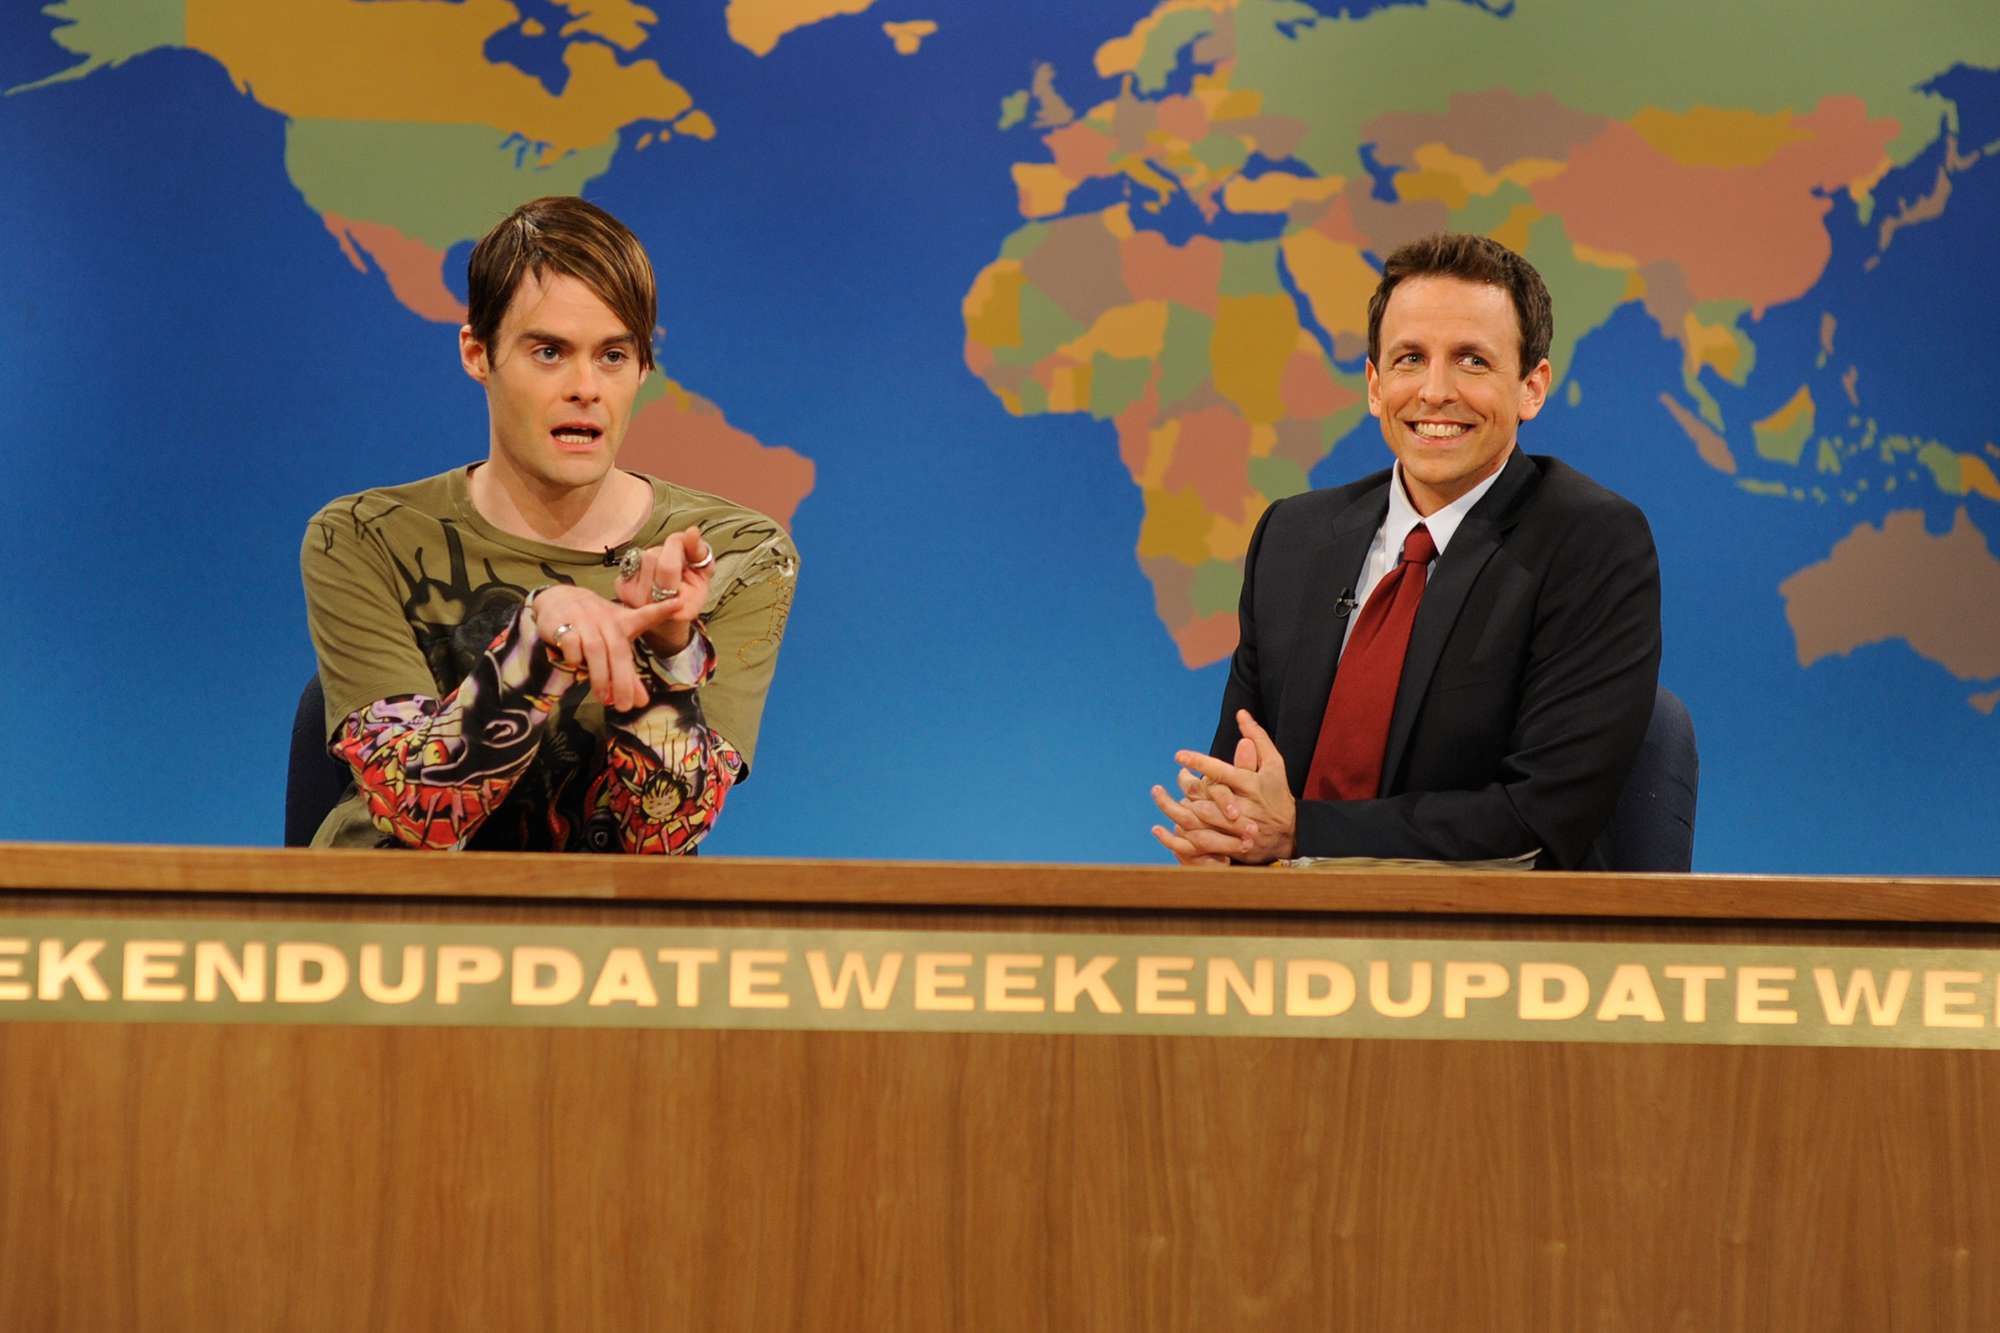 Bill Hader and Seth Meyers during "Weekend Update" on 'Saturday Night Live'.